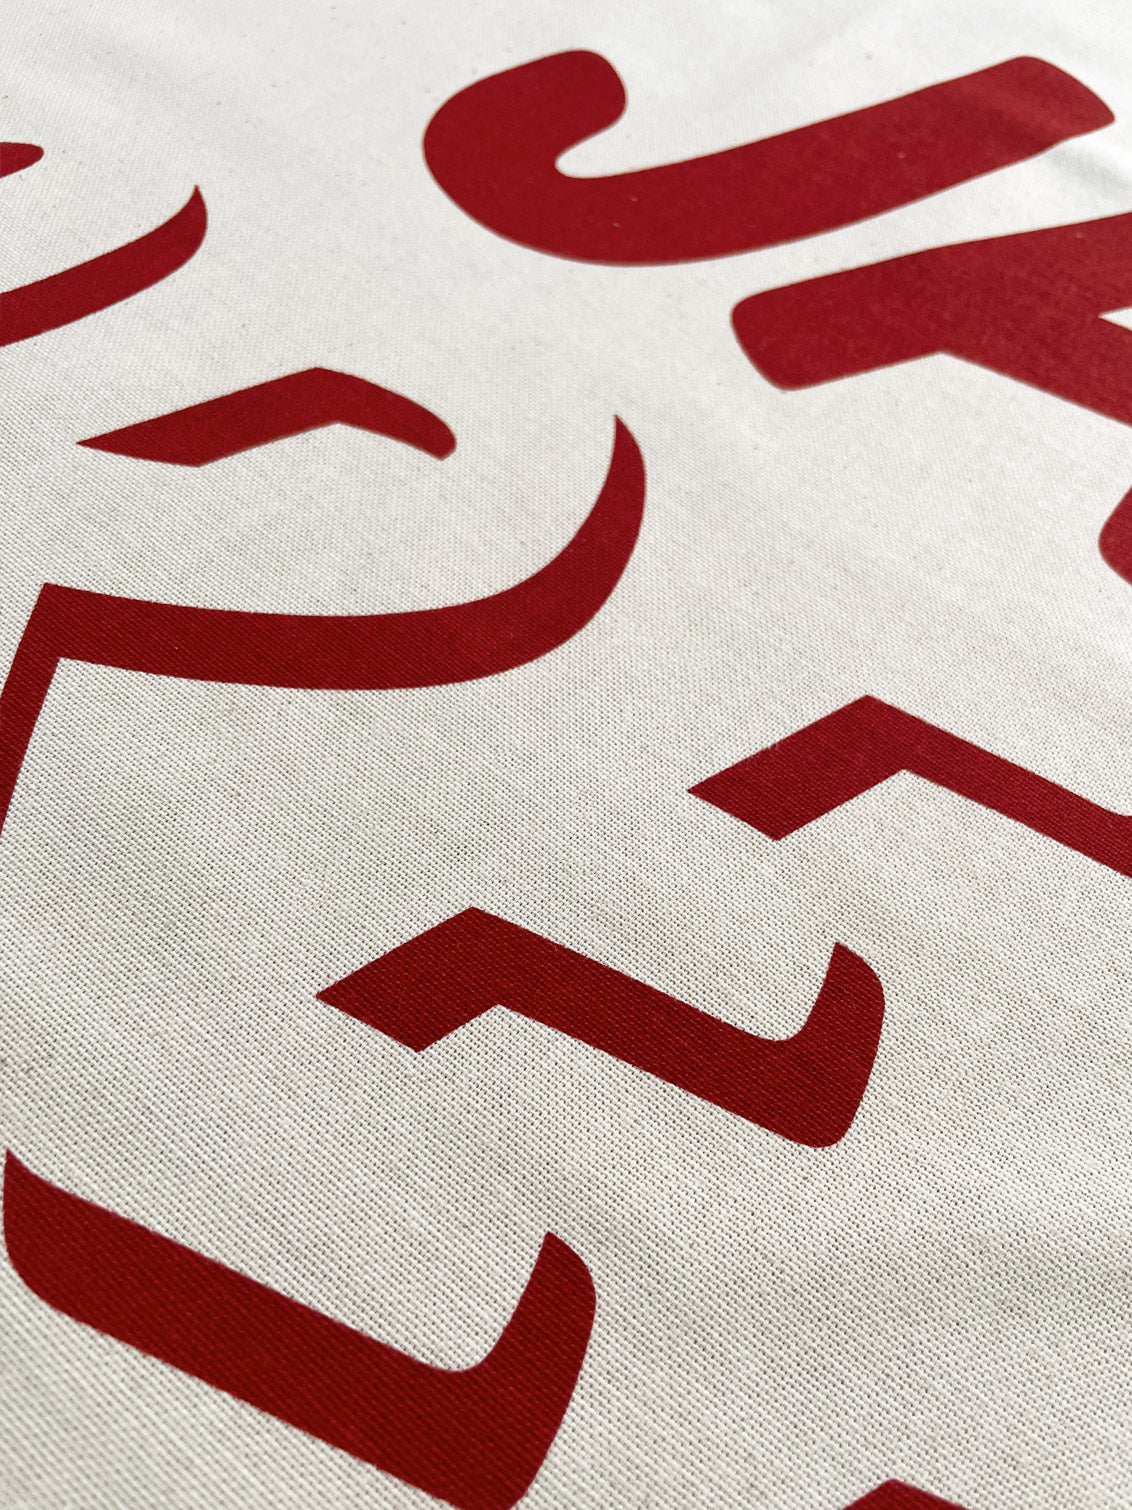 Close up of the red ink printed lettering on the cream natural cotton teatowel fabric.